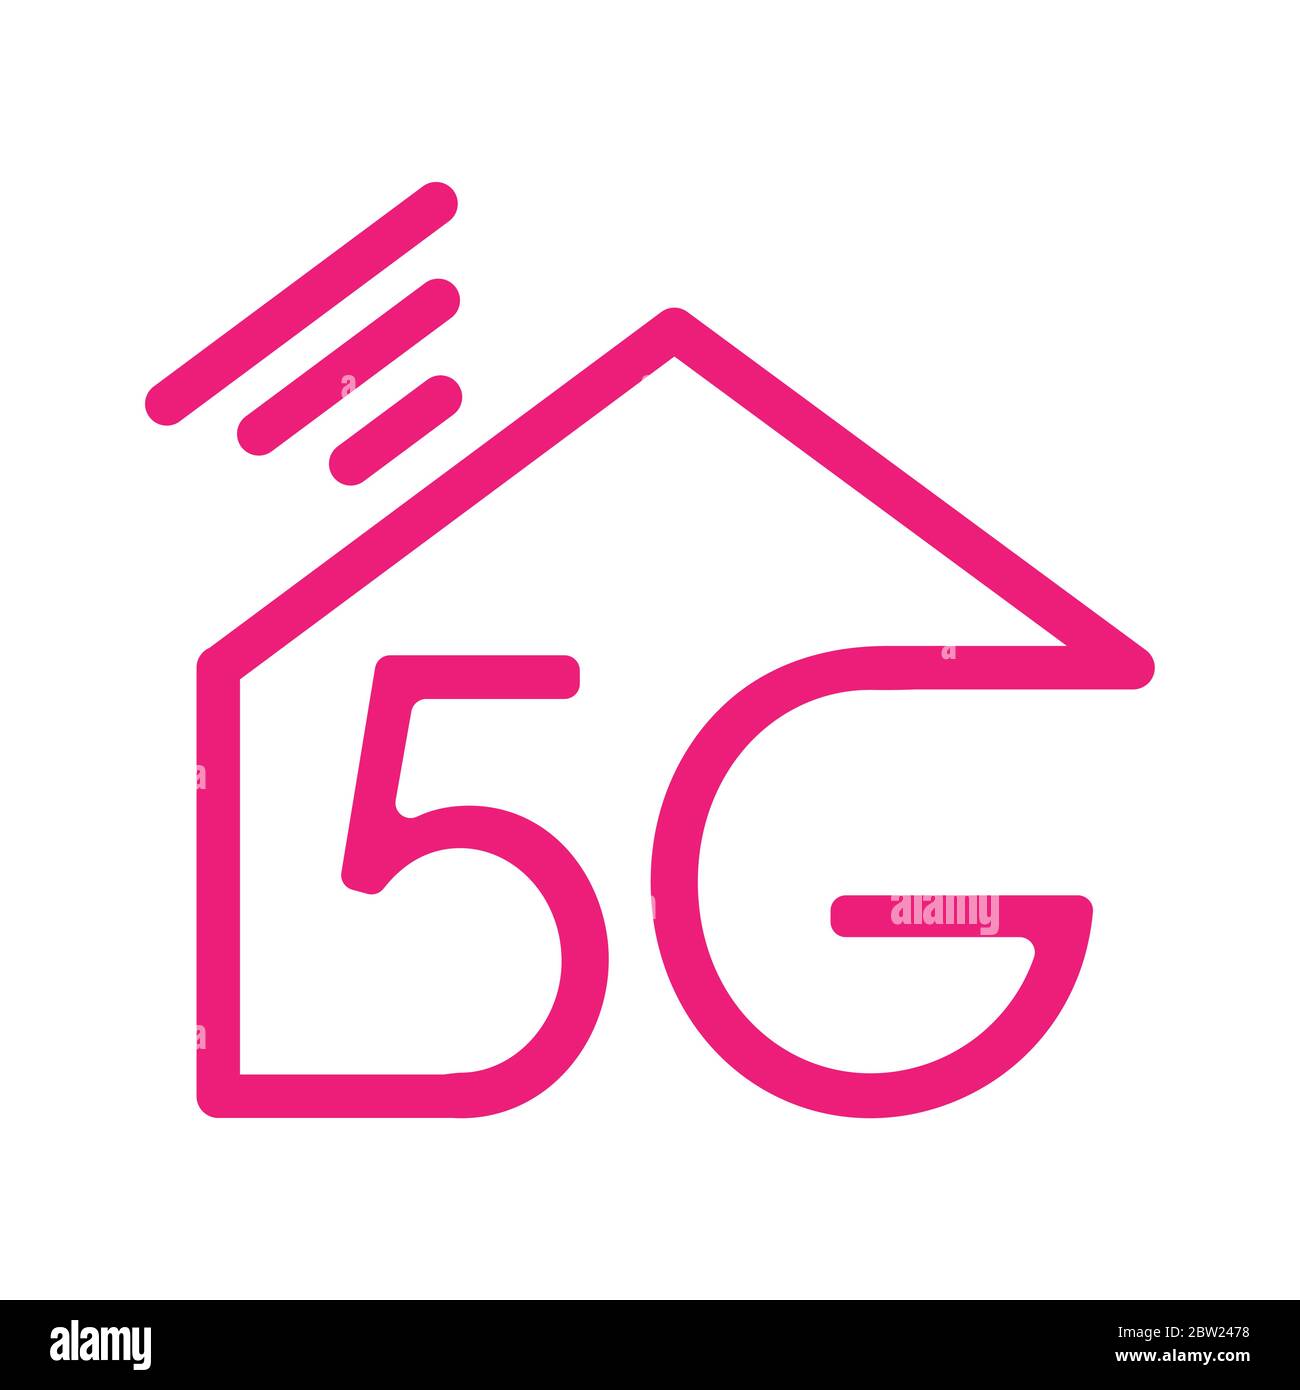 5g logo with house - Concept 5G fast internet, Logo 5G over the silhouettes of houses. Vector stock illustration. Illustration 5g internet symbol in f Stock Vector